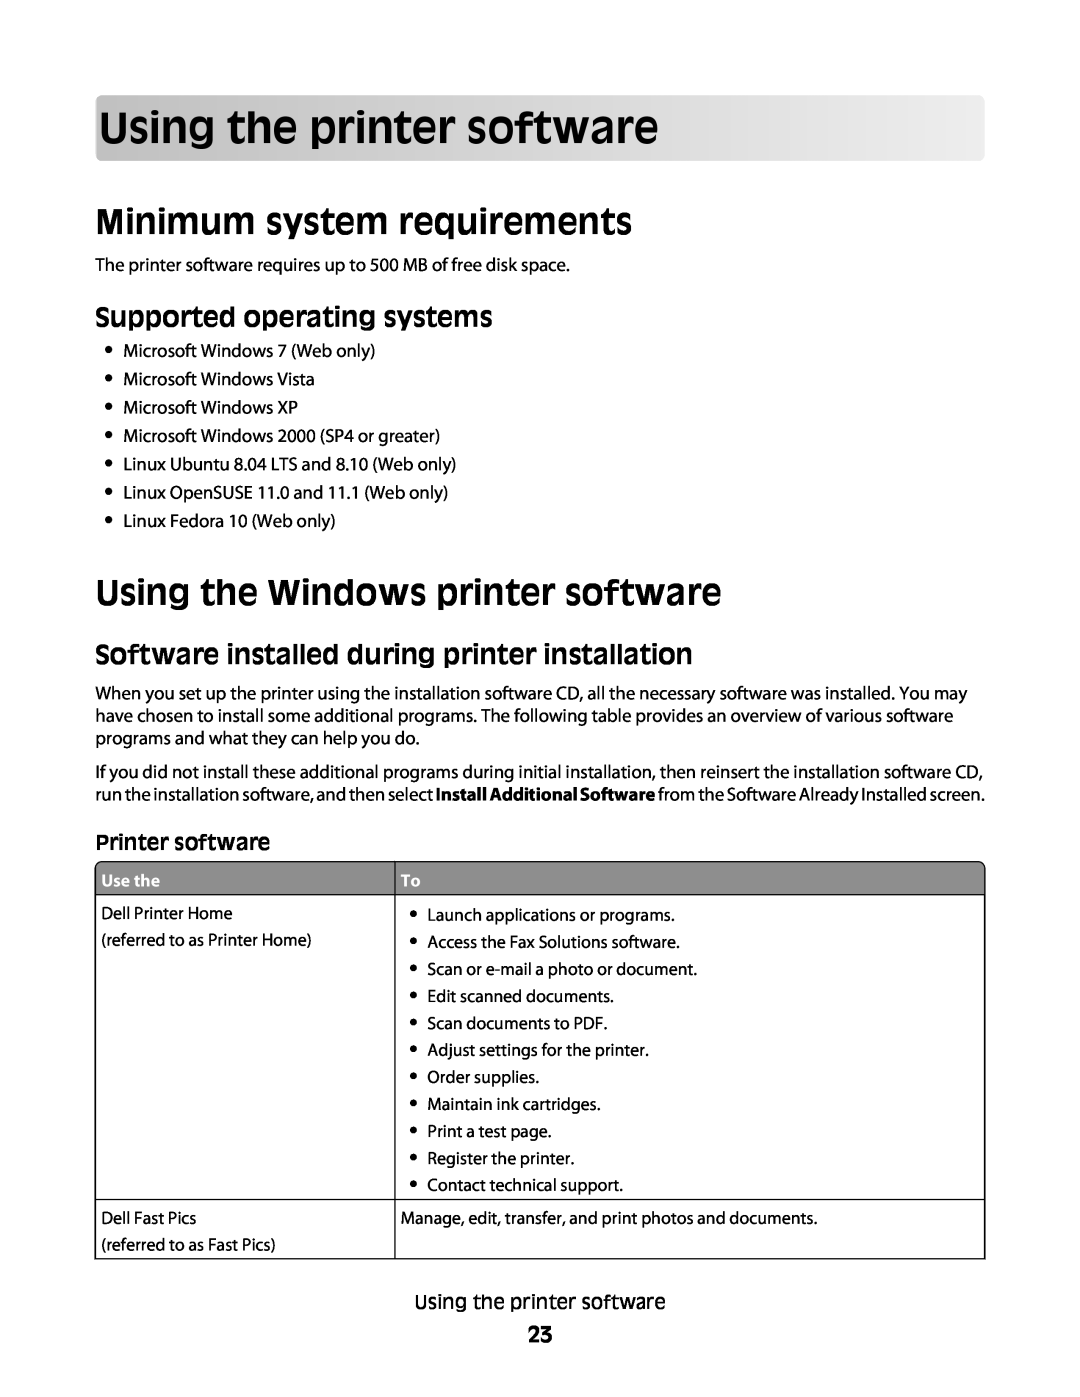 Dell V515W Using the printer software, Minimum system requirements, Using the Windows printer software, Printer software 